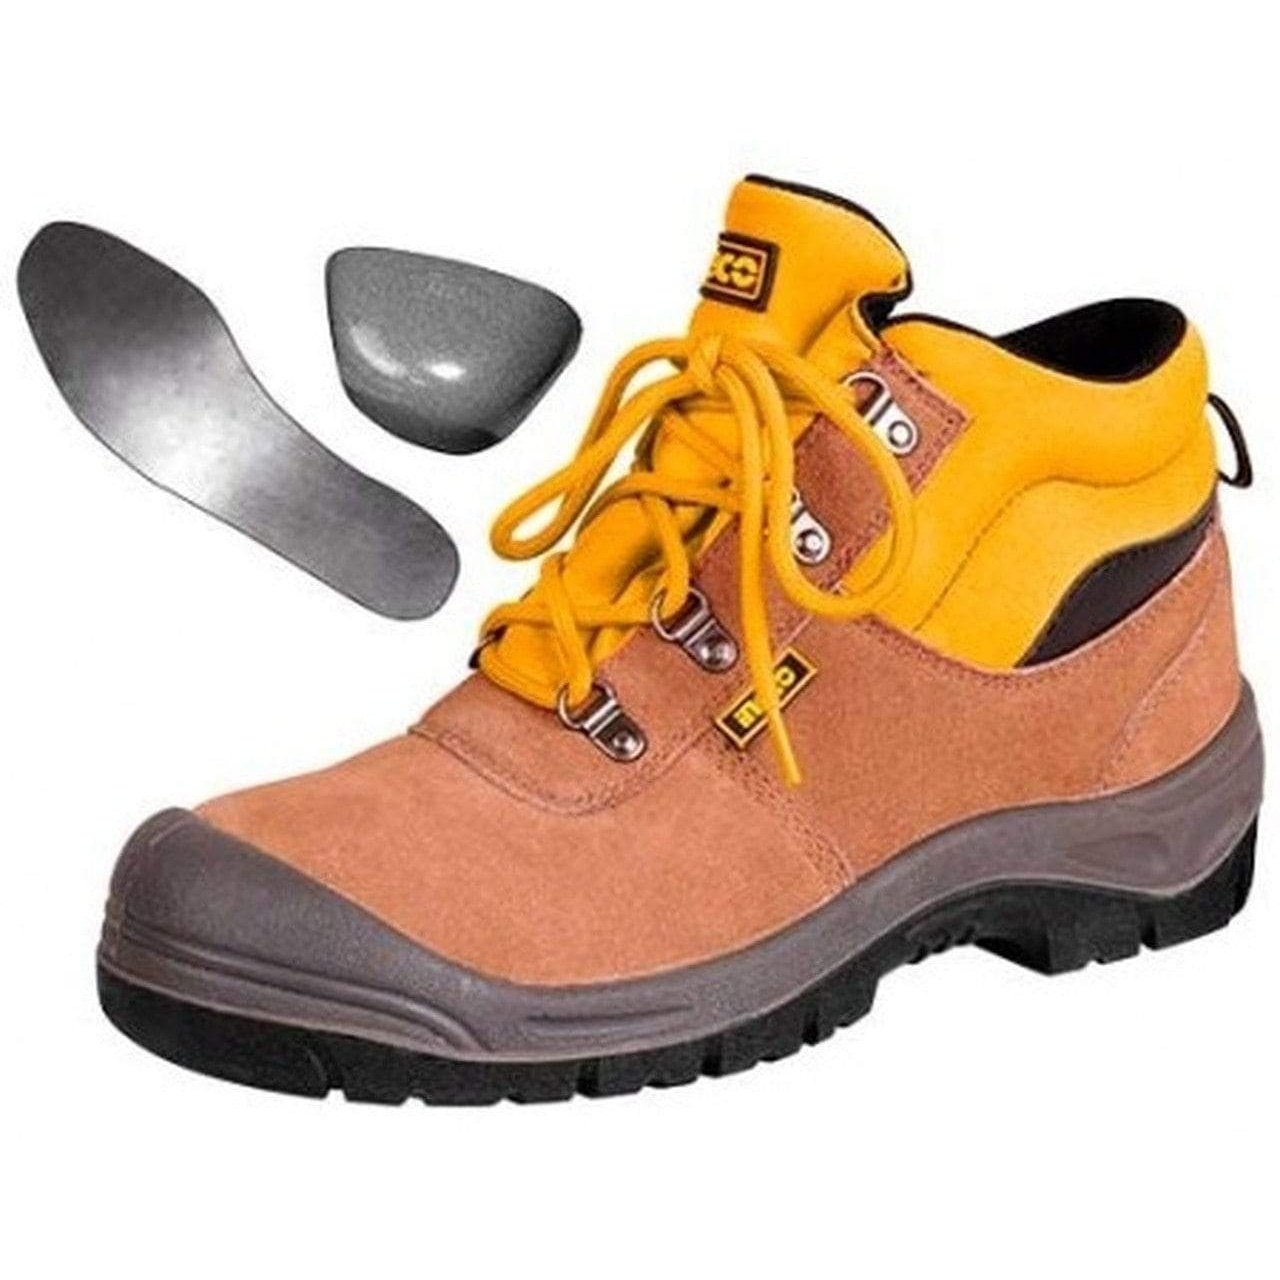 Ingco Safety Boots - SSH02SB | Supply Master | Accra, Ghana Tools Building Steel Engineering Hardware tool